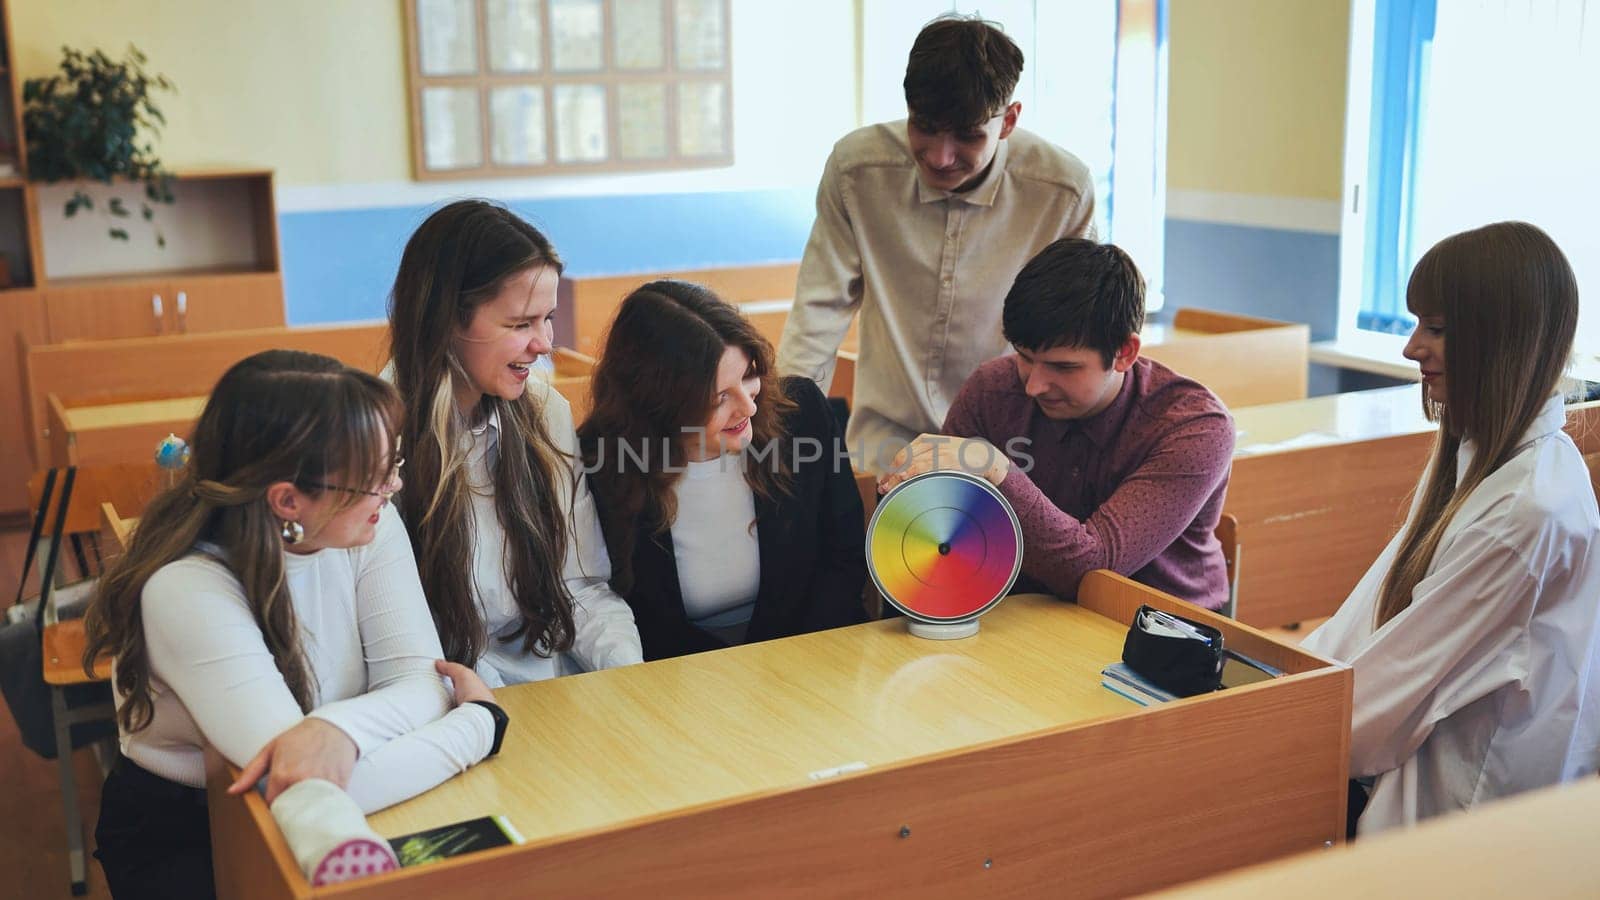 Students in physics class spin Newton's multicolored disk